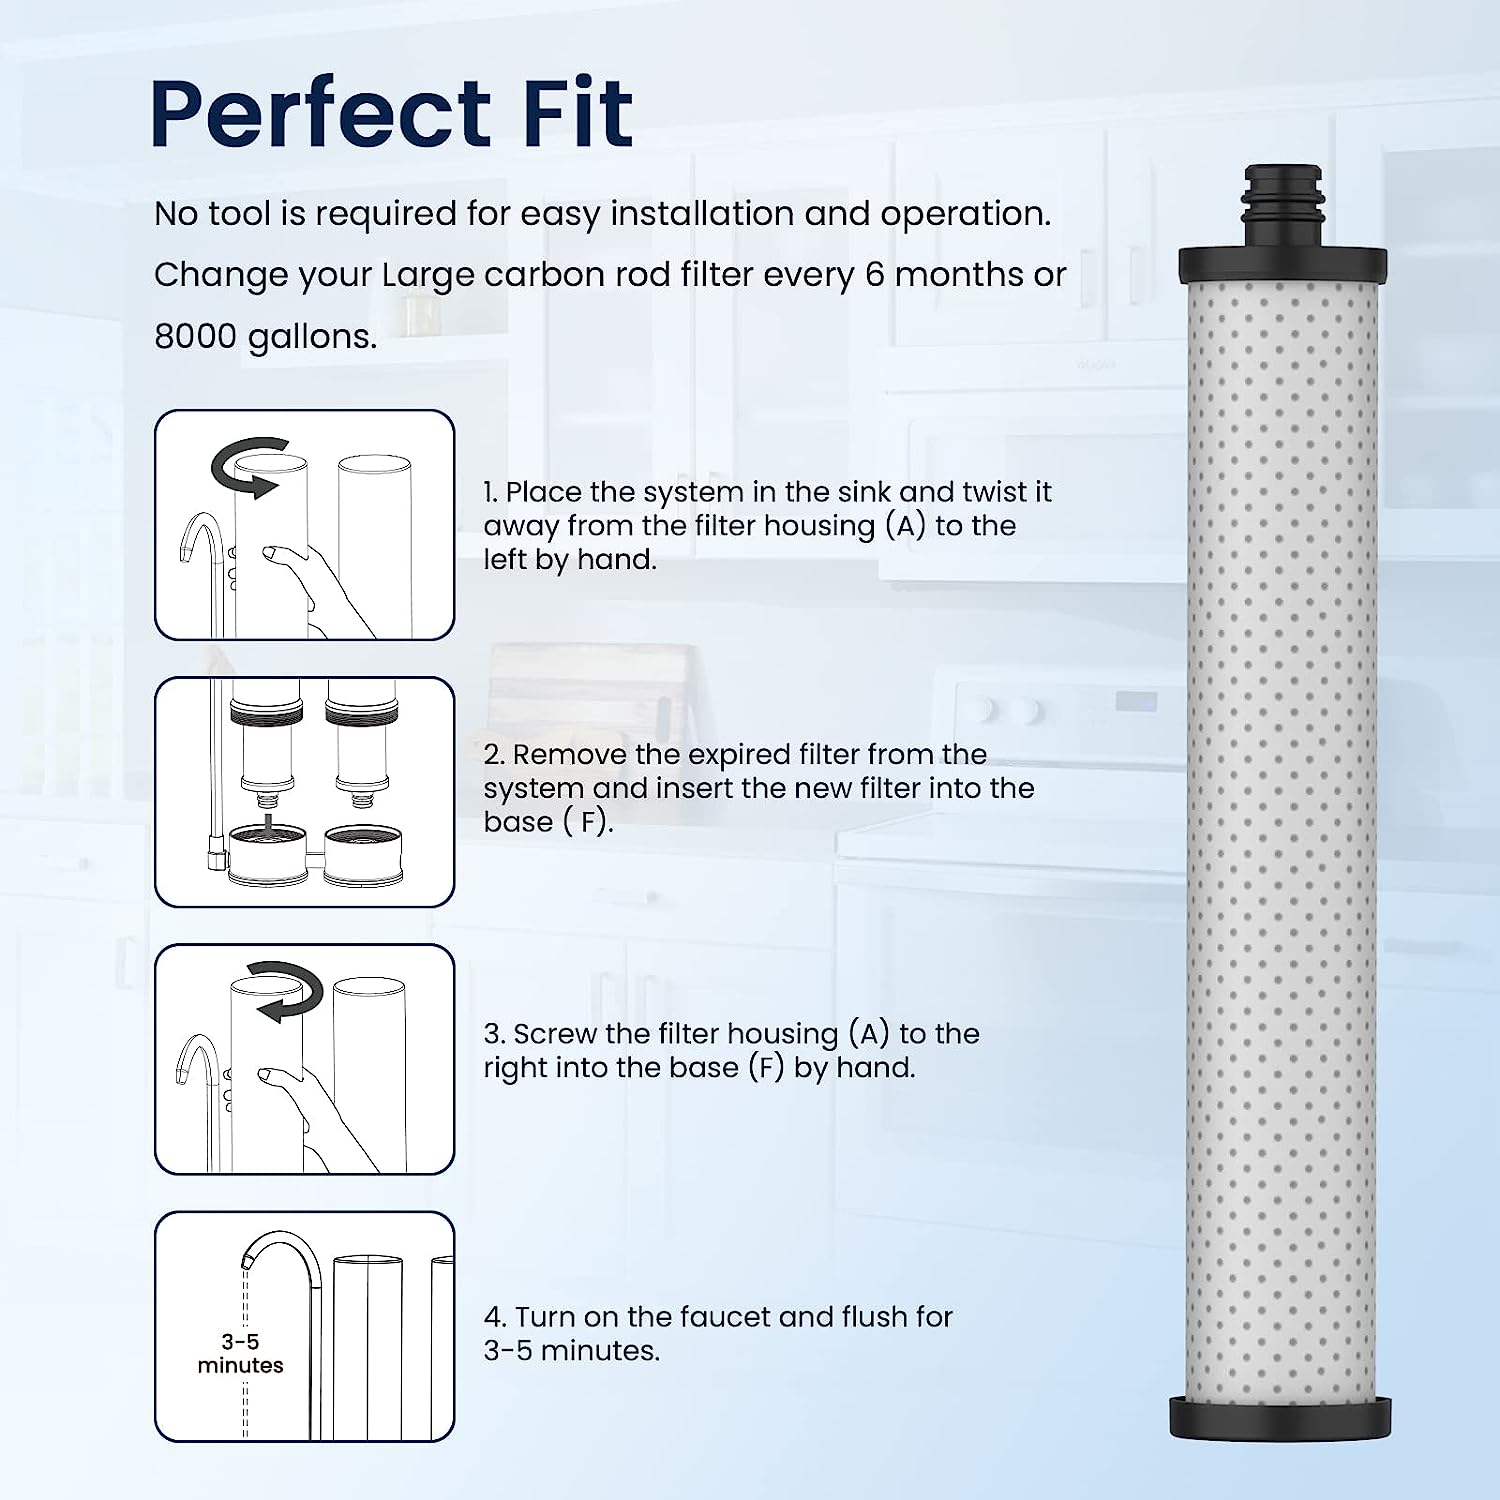 Glacier Fresh Countertop Filter System, Stainless Steel Faucet Water Filter System